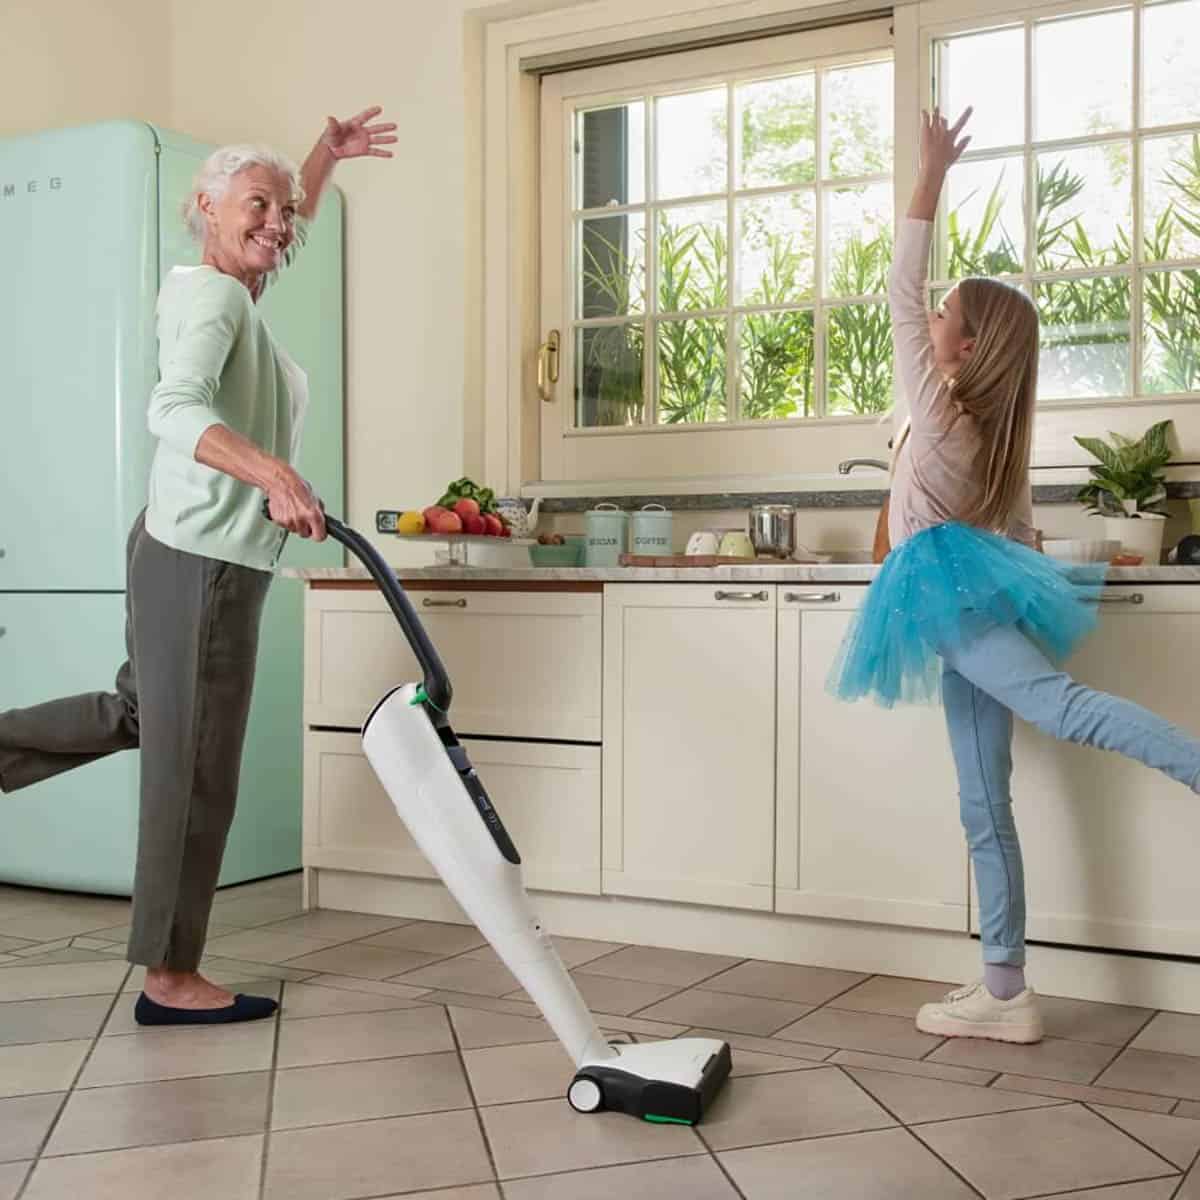 Kobold Vacuum VK7 cleaning the floor with a grandmother and child